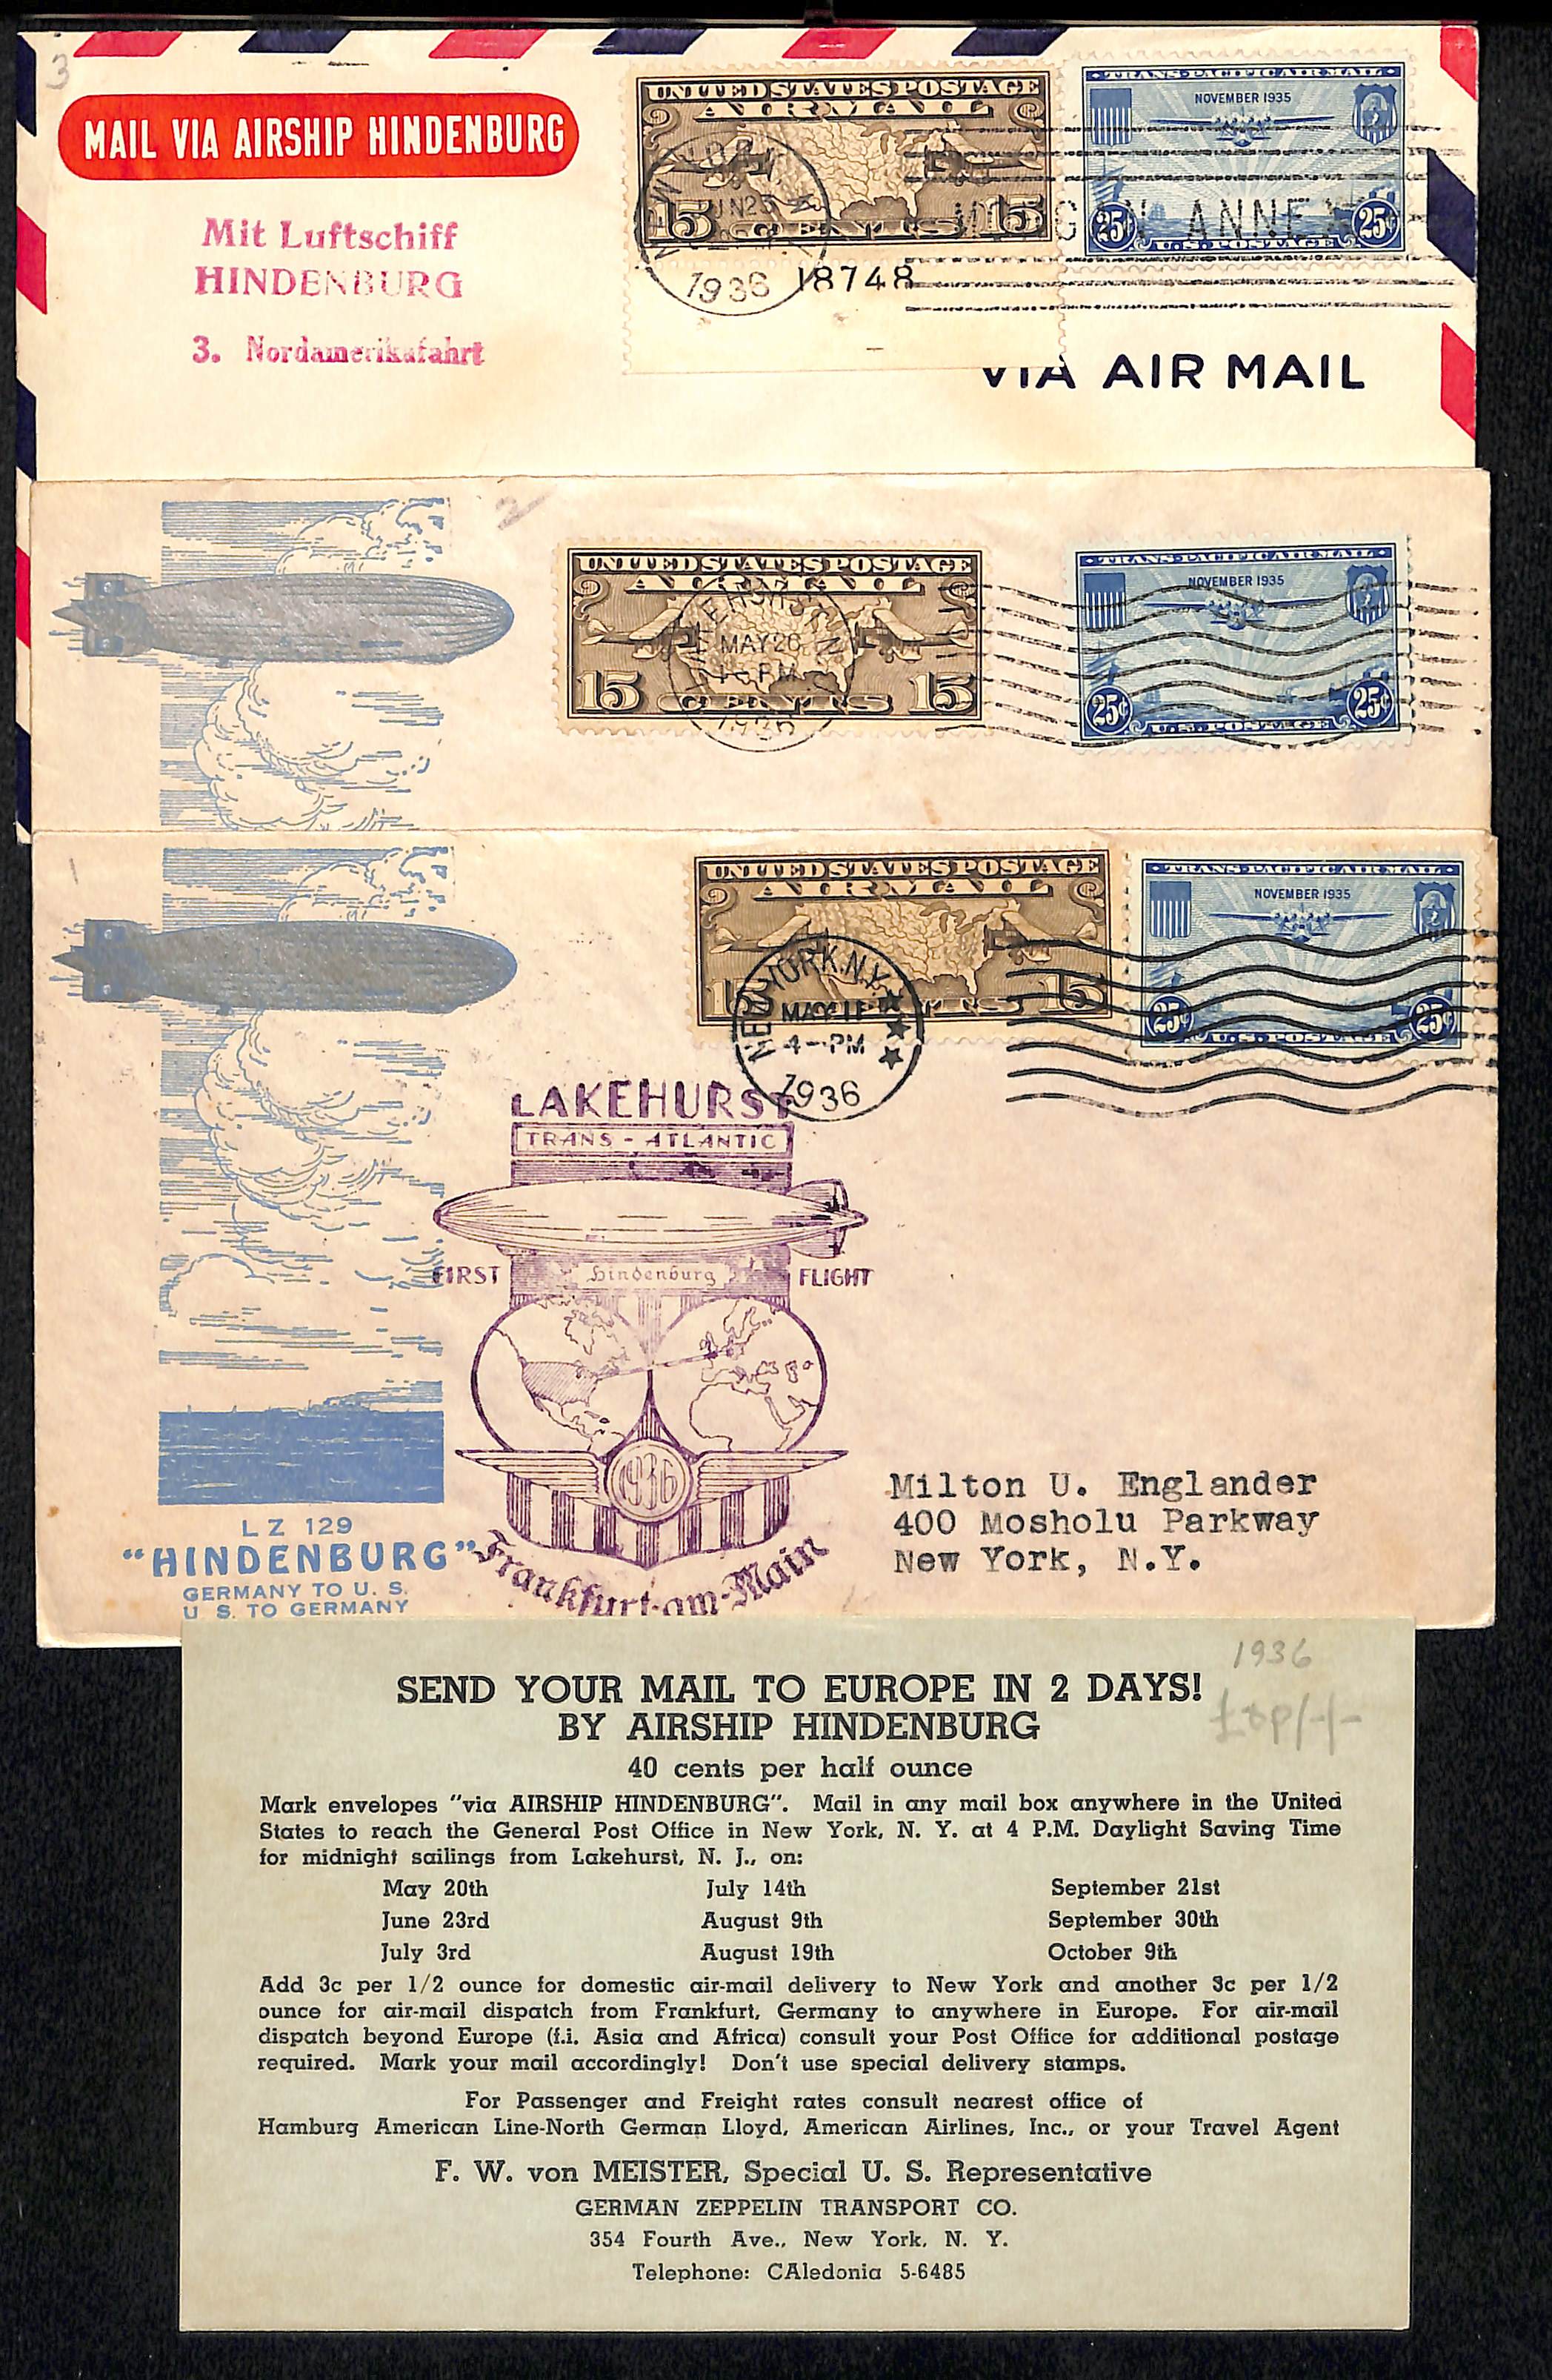 USA. 1936 (May-Oct) Covers carried on the ten "Hindenburg" Zeppelin flights from Lakehurst to - Image 2 of 2